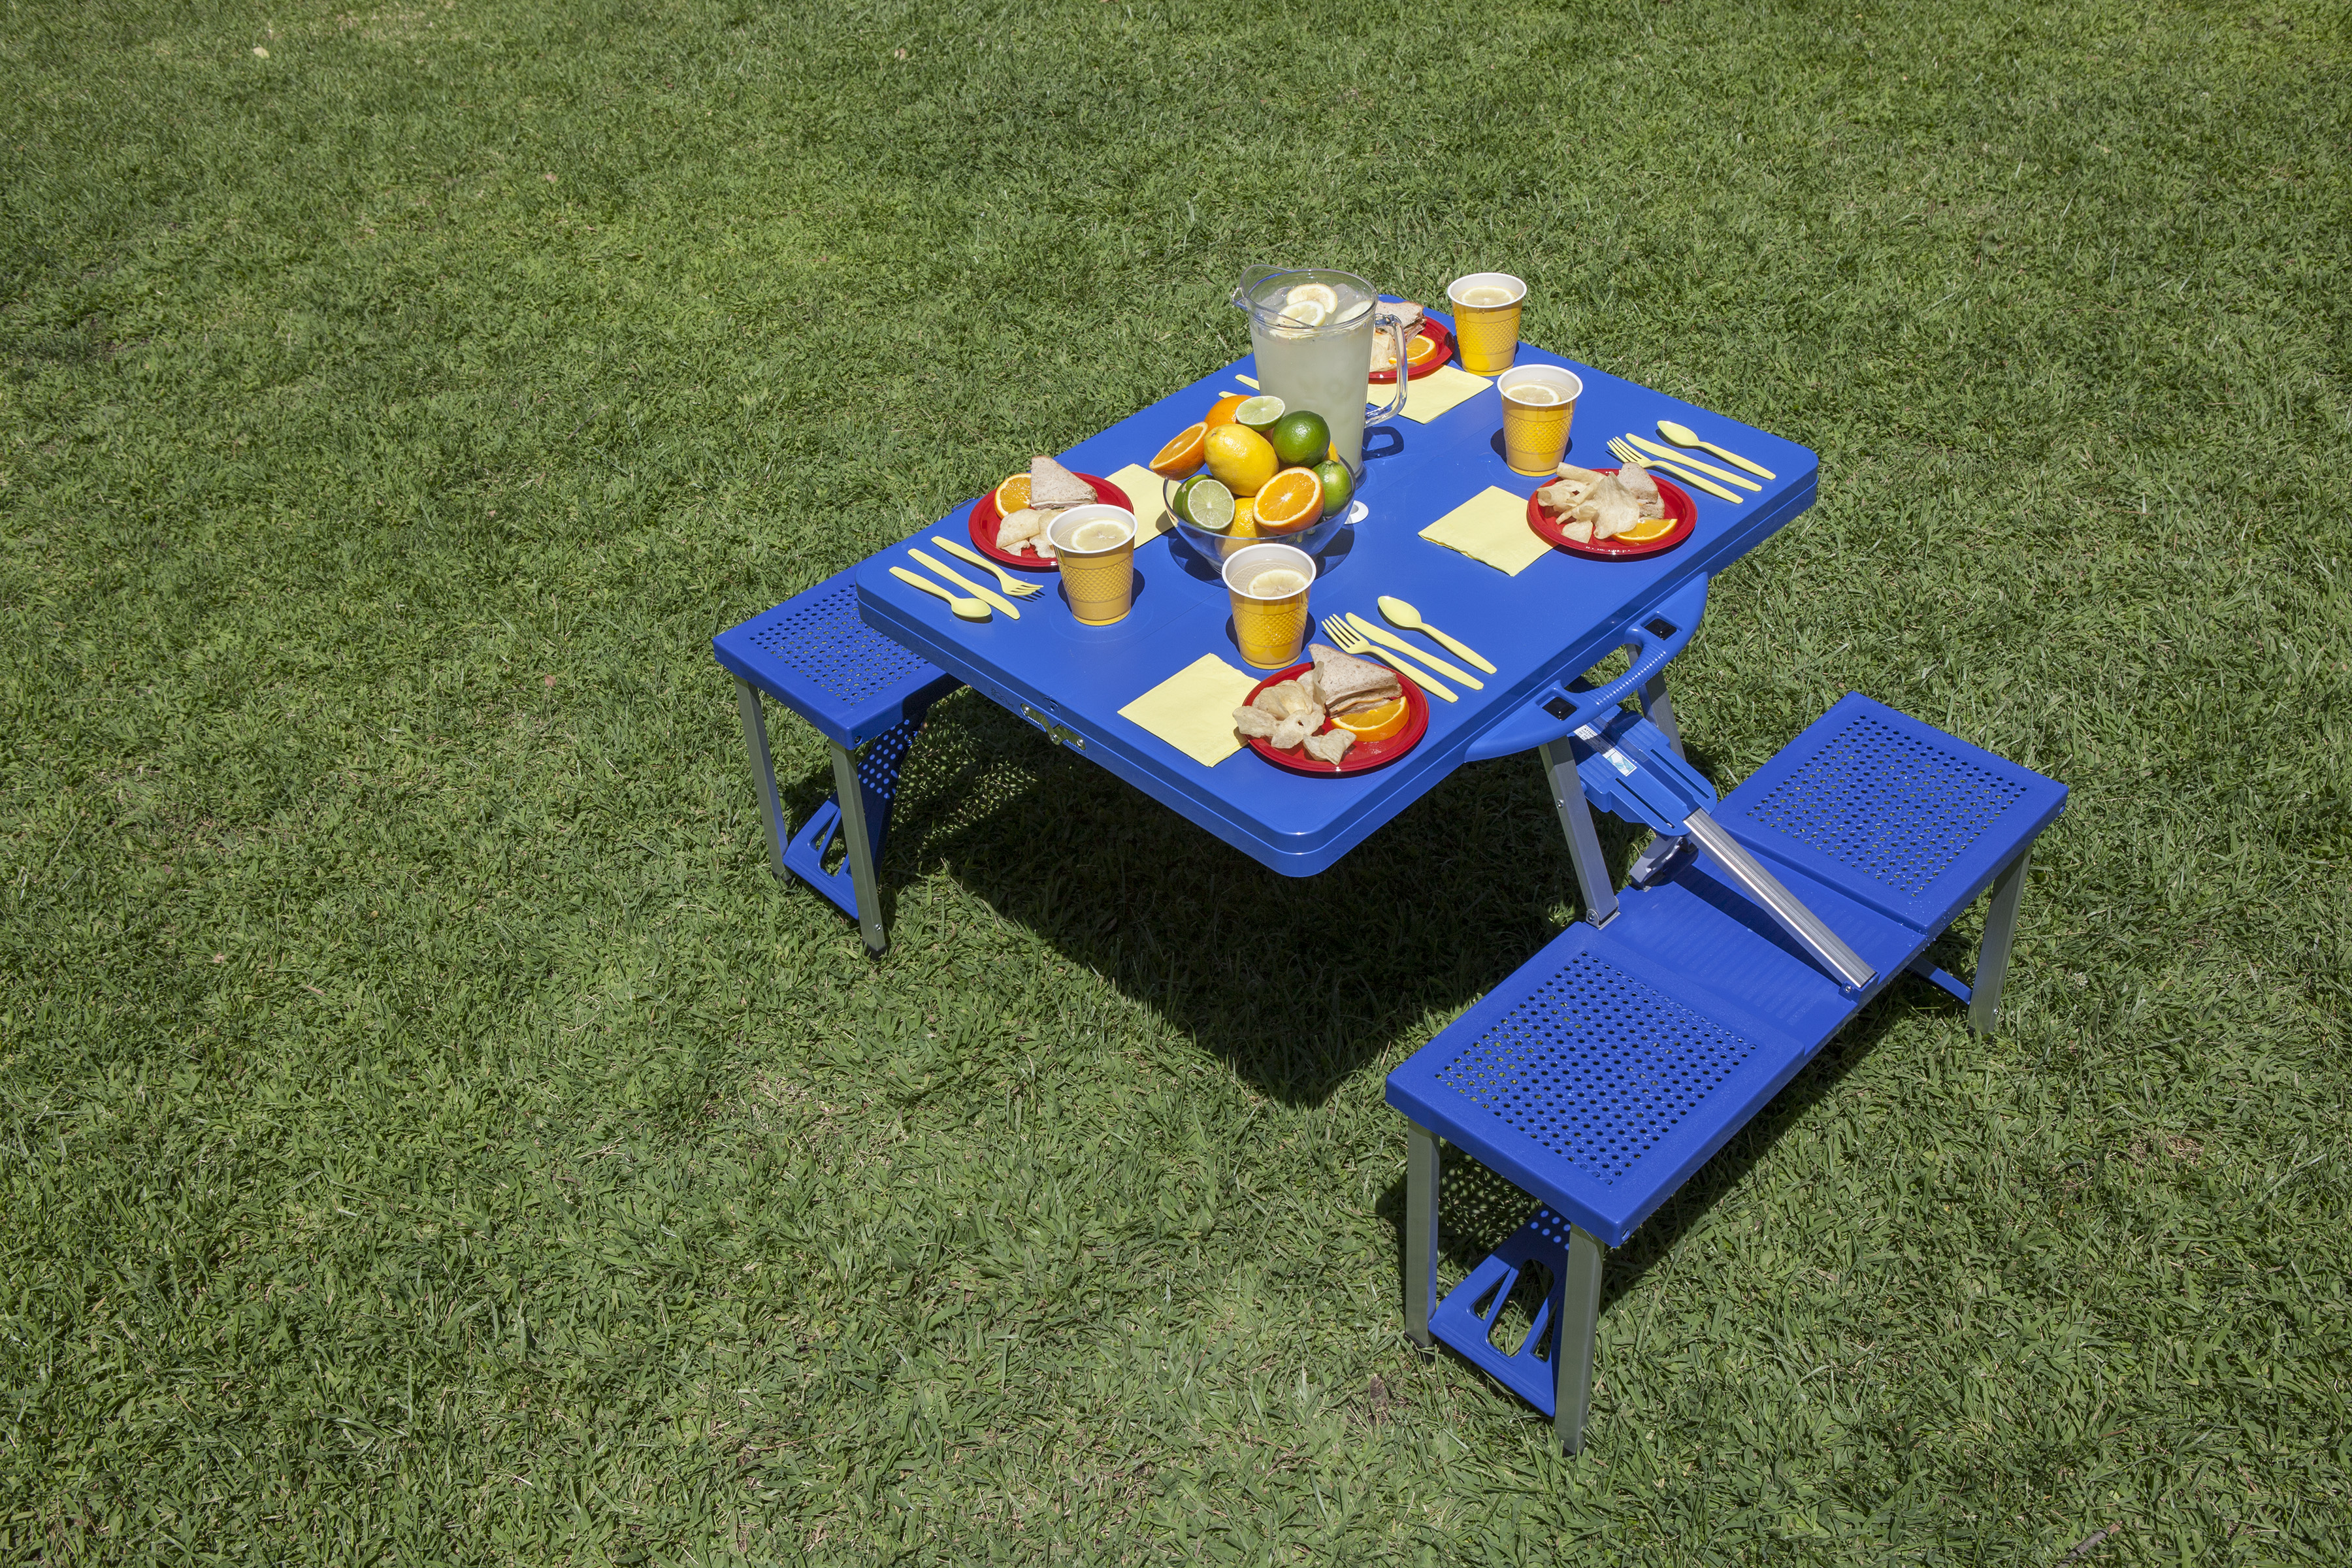 Virginia Cavaliers - Picnic Table Portable Folding Table with Seats